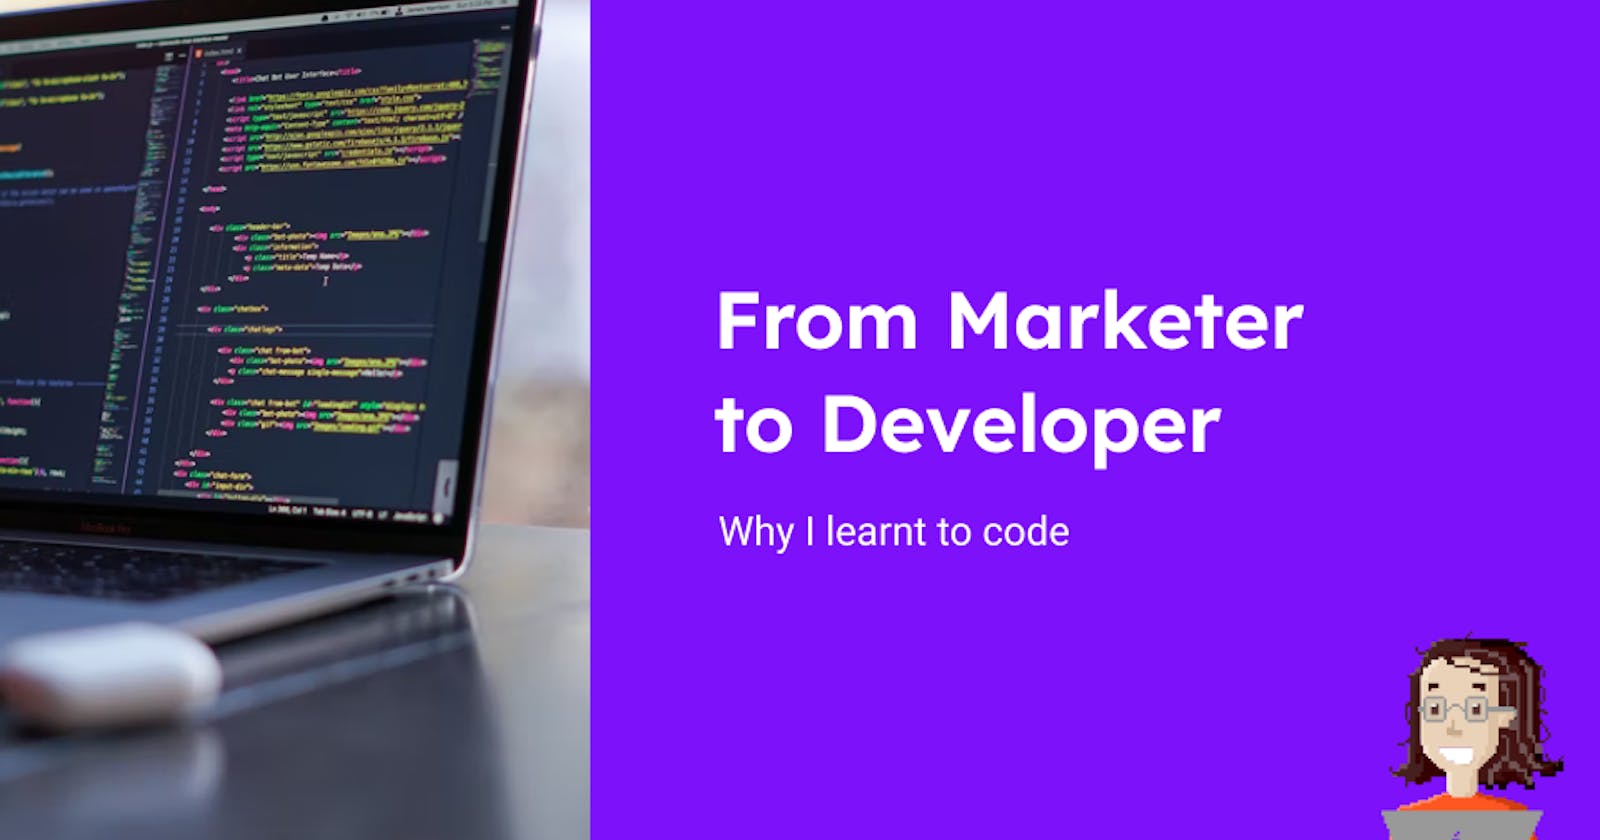 From Marketer to Developer